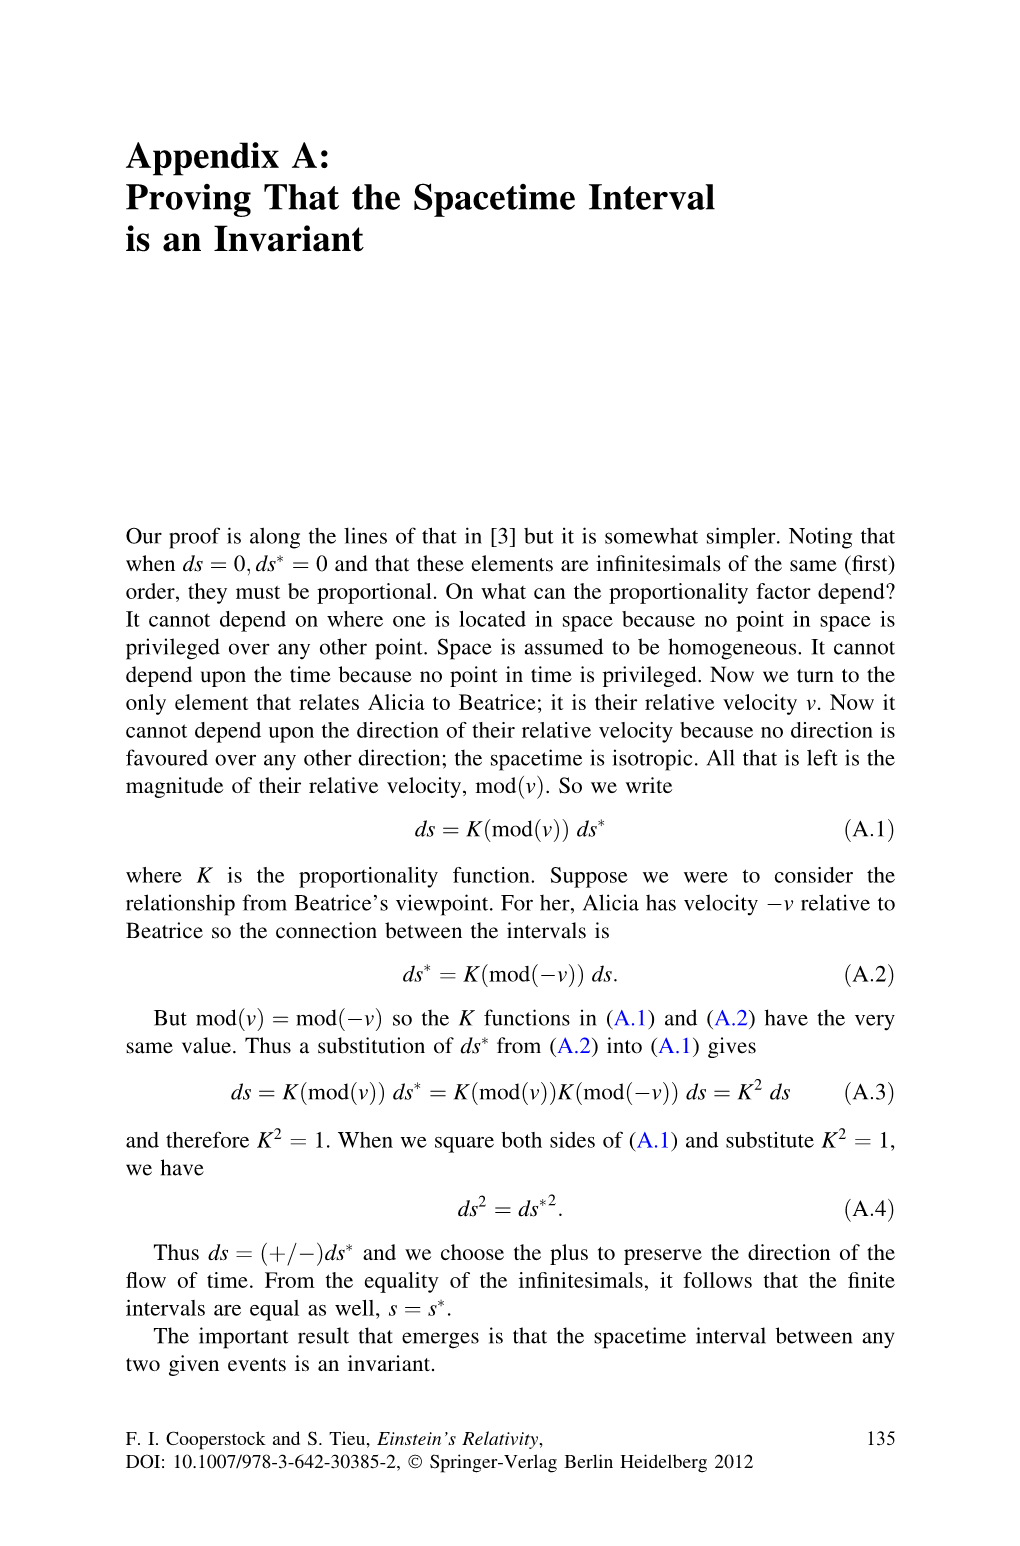 Appendix A: Proving That the Spacetime Interval Is an Invariant